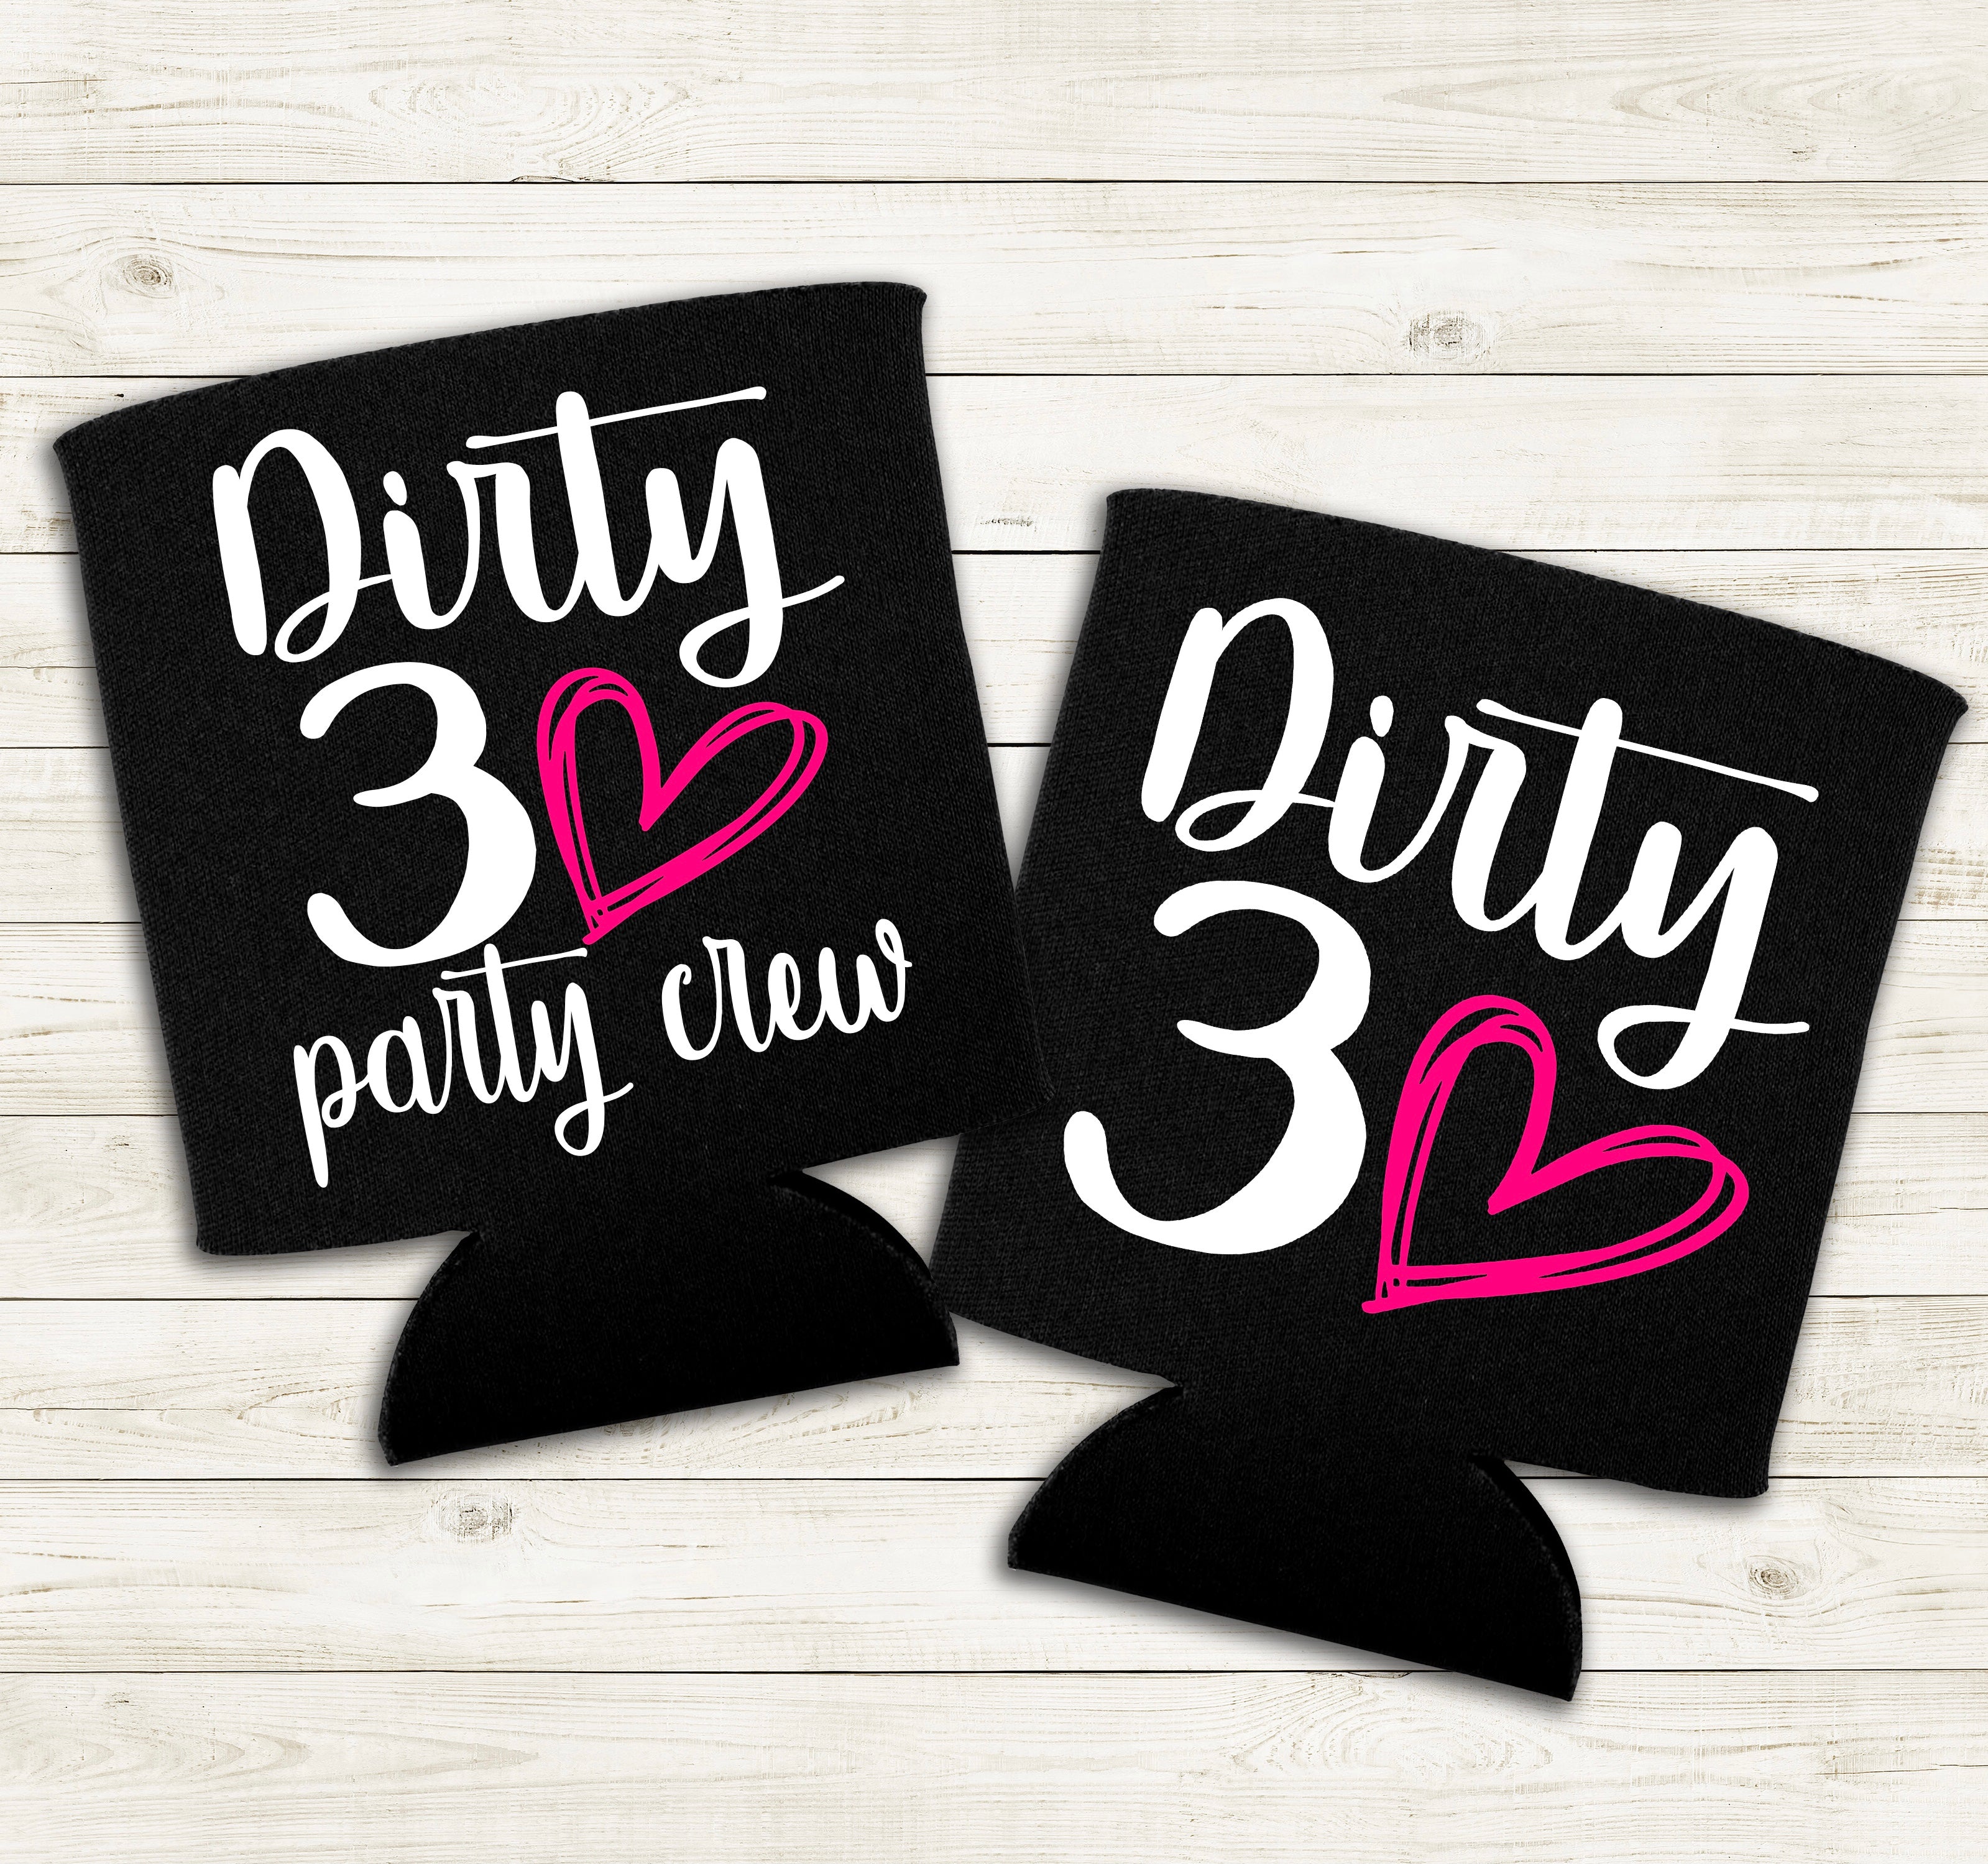 Beige Dirty 30, Dirty 30 Party Crew image_9c97b8f5-dc13-4cc5-8467-369446c74eaf.jpg dirty-30 Can Cooler